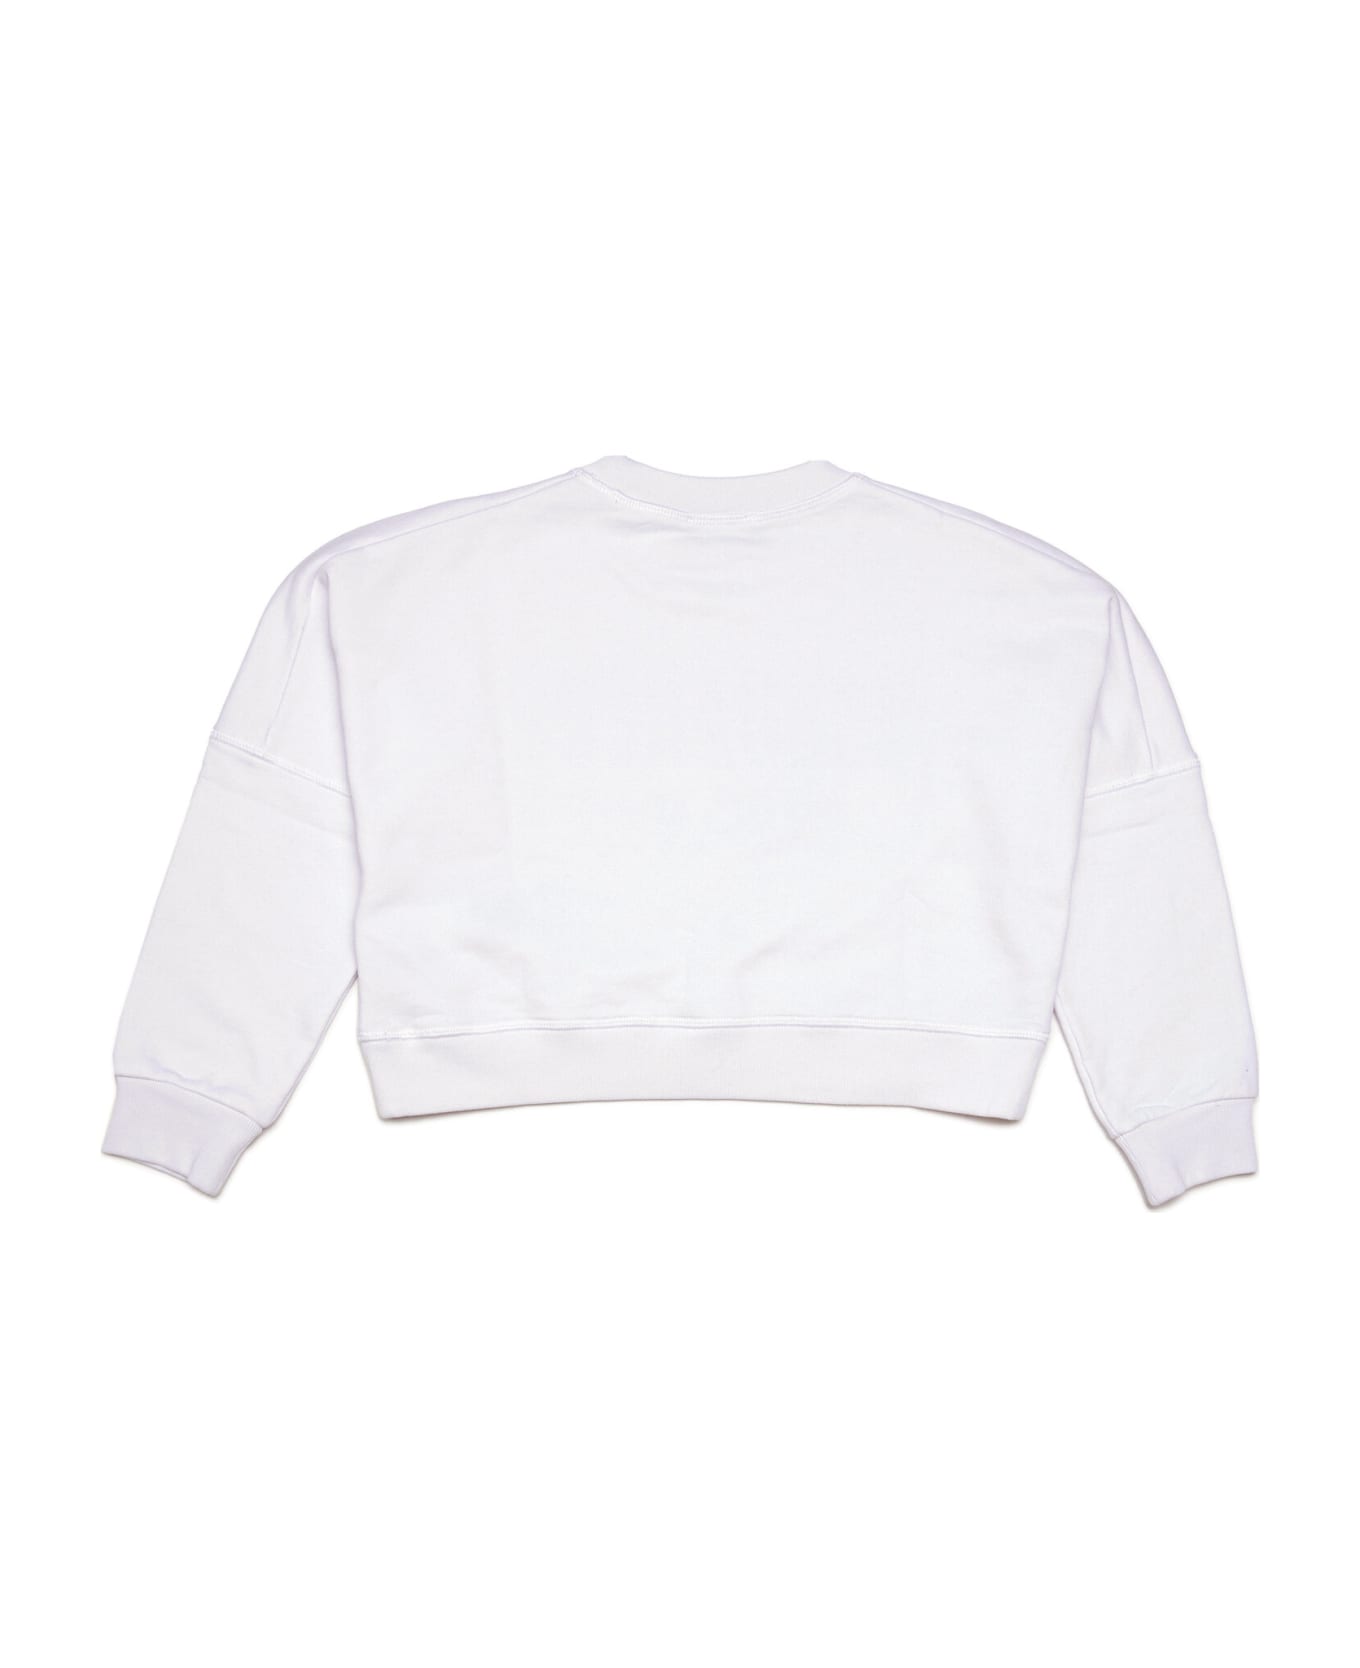 Dsquared2 D2s606f Over Sweat-shirt Dsquared - Dq100